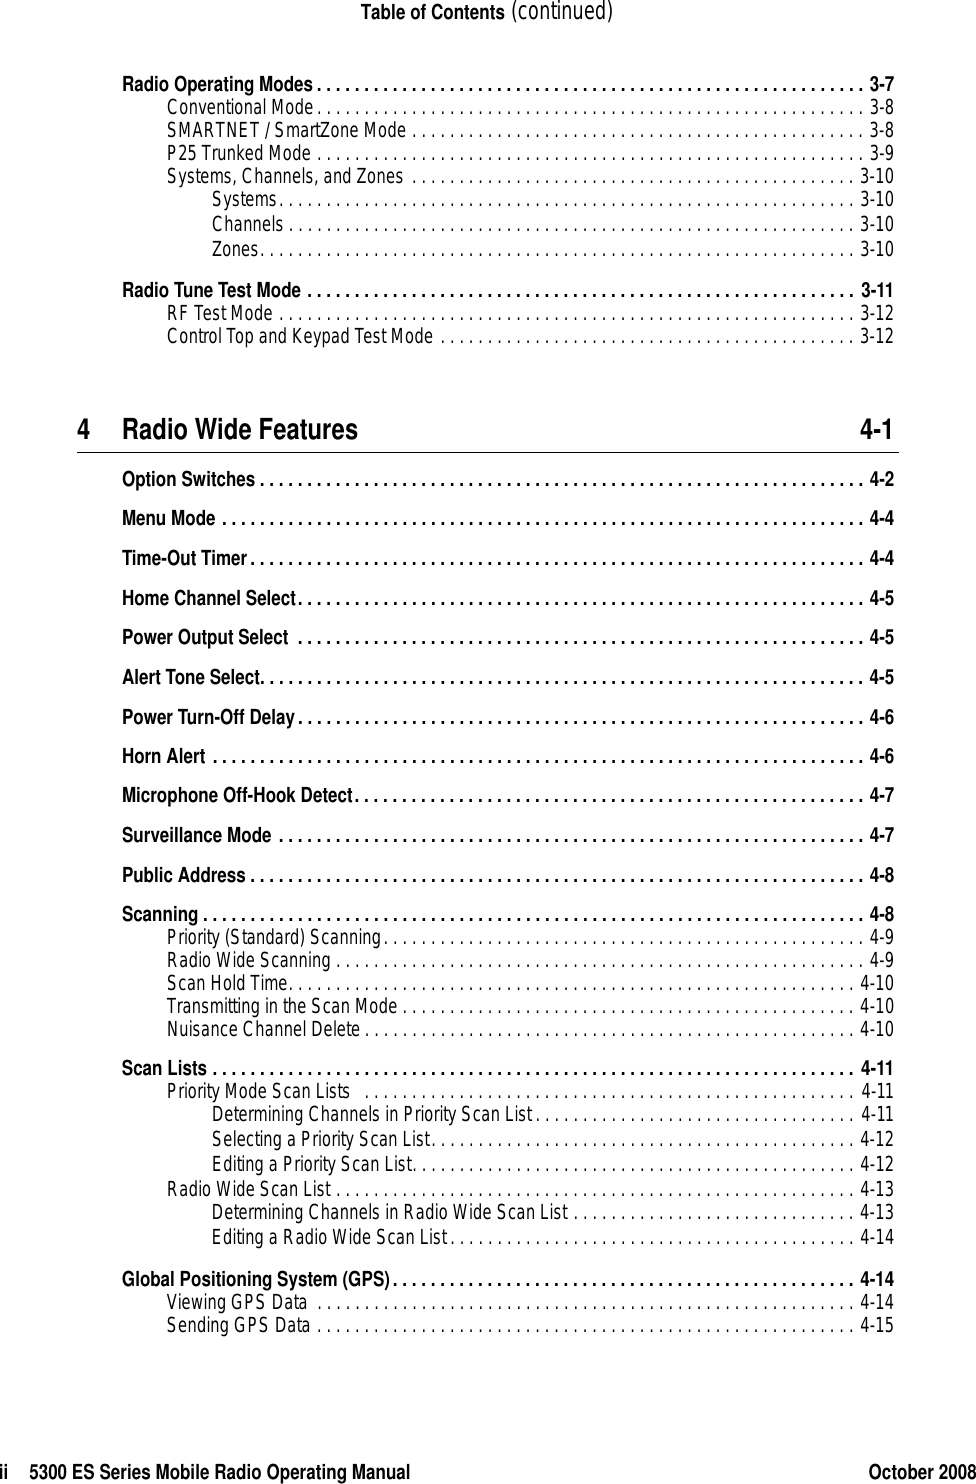 ii 5300 ES Series Mobile Radio Operating Manual October 2008Table of Contents (continued)Radio Operating Modes. . . . . . . . . . . . . . . . . . . . . . . . . . . . . . . . . . . . . . . . . . . . . . . . . . . . . . . . . . 3-7Conventional Mode. . . . . . . . . . . . . . . . . . . . . . . . . . . . . . . . . . . . . . . . . . . . . . . . . . . . . . . . . . 3-8SMARTNET / SmartZone Mode . . . . . . . . . . . . . . . . . . . . . . . . . . . . . . . . . . . . . . . . . . . . . . . . 3-8P25 Trunked Mode . . . . . . . . . . . . . . . . . . . . . . . . . . . . . . . . . . . . . . . . . . . . . . . . . . . . . . . . . . 3-9Systems, Channels, and Zones . . . . . . . . . . . . . . . . . . . . . . . . . . . . . . . . . . . . . . . . . . . . . . . 3-10Systems. . . . . . . . . . . . . . . . . . . . . . . . . . . . . . . . . . . . . . . . . . . . . . . . . . . . . . . . . . . . . 3-10Channels . . . . . . . . . . . . . . . . . . . . . . . . . . . . . . . . . . . . . . . . . . . . . . . . . . . . . . . . . . . . 3-10Zones. . . . . . . . . . . . . . . . . . . . . . . . . . . . . . . . . . . . . . . . . . . . . . . . . . . . . . . . . . . . . . . 3-10Radio Tune Test Mode . . . . . . . . . . . . . . . . . . . . . . . . . . . . . . . . . . . . . . . . . . . . . . . . . . . . . . . . . . 3-11RF Test Mode . . . . . . . . . . . . . . . . . . . . . . . . . . . . . . . . . . . . . . . . . . . . . . . . . . . . . . . . . . . . . 3-12Control Top and Keypad Test Mode . . . . . . . . . . . . . . . . . . . . . . . . . . . . . . . . . . . . . . . . . . . . 3-124 Radio Wide Features 4-1Option Switches . . . . . . . . . . . . . . . . . . . . . . . . . . . . . . . . . . . . . . . . . . . . . . . . . . . . . . . . . . . . . . . . 4-2Menu Mode . . . . . . . . . . . . . . . . . . . . . . . . . . . . . . . . . . . . . . . . . . . . . . . . . . . . . . . . . . . . . . . . . . . . 4-4Time-Out Timer. . . . . . . . . . . . . . . . . . . . . . . . . . . . . . . . . . . . . . . . . . . . . . . . . . . . . . . . . . . . . . . . . 4-4Home Channel Select. . . . . . . . . . . . . . . . . . . . . . . . . . . . . . . . . . . . . . . . . . . . . . . . . . . . . . . . . . . . 4-5Power Output Select  . . . . . . . . . . . . . . . . . . . . . . . . . . . . . . . . . . . . . . . . . . . . . . . . . . . . . . . . . . . . 4-5Alert Tone Select. . . . . . . . . . . . . . . . . . . . . . . . . . . . . . . . . . . . . . . . . . . . . . . . . . . . . . . . . . . . . . . . 4-5Power Turn-Off Delay. . . . . . . . . . . . . . . . . . . . . . . . . . . . . . . . . . . . . . . . . . . . . . . . . . . . . . . . . . . . 4-6Horn Alert . . . . . . . . . . . . . . . . . . . . . . . . . . . . . . . . . . . . . . . . . . . . . . . . . . . . . . . . . . . . . . . . . . . . . 4-6Microphone Off-Hook Detect. . . . . . . . . . . . . . . . . . . . . . . . . . . . . . . . . . . . . . . . . . . . . . . . . . . . . . 4-7Surveillance Mode . . . . . . . . . . . . . . . . . . . . . . . . . . . . . . . . . . . . . . . . . . . . . . . . . . . . . . . . . . . . . . 4-7Public Address . . . . . . . . . . . . . . . . . . . . . . . . . . . . . . . . . . . . . . . . . . . . . . . . . . . . . . . . . . . . . . . . . 4-8Scanning . . . . . . . . . . . . . . . . . . . . . . . . . . . . . . . . . . . . . . . . . . . . . . . . . . . . . . . . . . . . . . . . . . . . . . 4-8Priority (Standard) Scanning. . . . . . . . . . . . . . . . . . . . . . . . . . . . . . . . . . . . . . . . . . . . . . . . . . . 4-9Radio Wide Scanning . . . . . . . . . . . . . . . . . . . . . . . . . . . . . . . . . . . . . . . . . . . . . . . . . . . . . . . . 4-9Scan Hold Time. . . . . . . . . . . . . . . . . . . . . . . . . . . . . . . . . . . . . . . . . . . . . . . . . . . . . . . . . . . . 4-10Transmitting in the Scan Mode . . . . . . . . . . . . . . . . . . . . . . . . . . . . . . . . . . . . . . . . . . . . . . . . 4-10Nuisance Channel Delete . . . . . . . . . . . . . . . . . . . . . . . . . . . . . . . . . . . . . . . . . . . . . . . . . . . . 4-10Scan Lists . . . . . . . . . . . . . . . . . . . . . . . . . . . . . . . . . . . . . . . . . . . . . . . . . . . . . . . . . . . . . . . . . . . . 4-11Priority Mode Scan Lists   . . . . . . . . . . . . . . . . . . . . . . . . . . . . . . . . . . . . . . . . . . . . . . . . . . . . 4-11Determining Channels in Priority Scan List . . . . . . . . . . . . . . . . . . . . . . . . . . . . . . . . . . 4-11Selecting a Priority Scan List. . . . . . . . . . . . . . . . . . . . . . . . . . . . . . . . . . . . . . . . . . . . . 4-12Editing a Priority Scan List. . . . . . . . . . . . . . . . . . . . . . . . . . . . . . . . . . . . . . . . . . . . . . . 4-12Radio Wide Scan List . . . . . . . . . . . . . . . . . . . . . . . . . . . . . . . . . . . . . . . . . . . . . . . . . . . . . . . 4-13Determining Channels in Radio Wide Scan List . . . . . . . . . . . . . . . . . . . . . . . . . . . . . . 4-13Editing a Radio Wide Scan List. . . . . . . . . . . . . . . . . . . . . . . . . . . . . . . . . . . . . . . . . . . 4-14Global Positioning System (GPS). . . . . . . . . . . . . . . . . . . . . . . . . . . . . . . . . . . . . . . . . . . . . . . . . 4-14Viewing GPS Data  . . . . . . . . . . . . . . . . . . . . . . . . . . . . . . . . . . . . . . . . . . . . . . . . . . . . . . . . . 4-14Sending GPS Data . . . . . . . . . . . . . . . . . . . . . . . . . . . . . . . . . . . . . . . . . . . . . . . . . . . . . . . . . 4-15